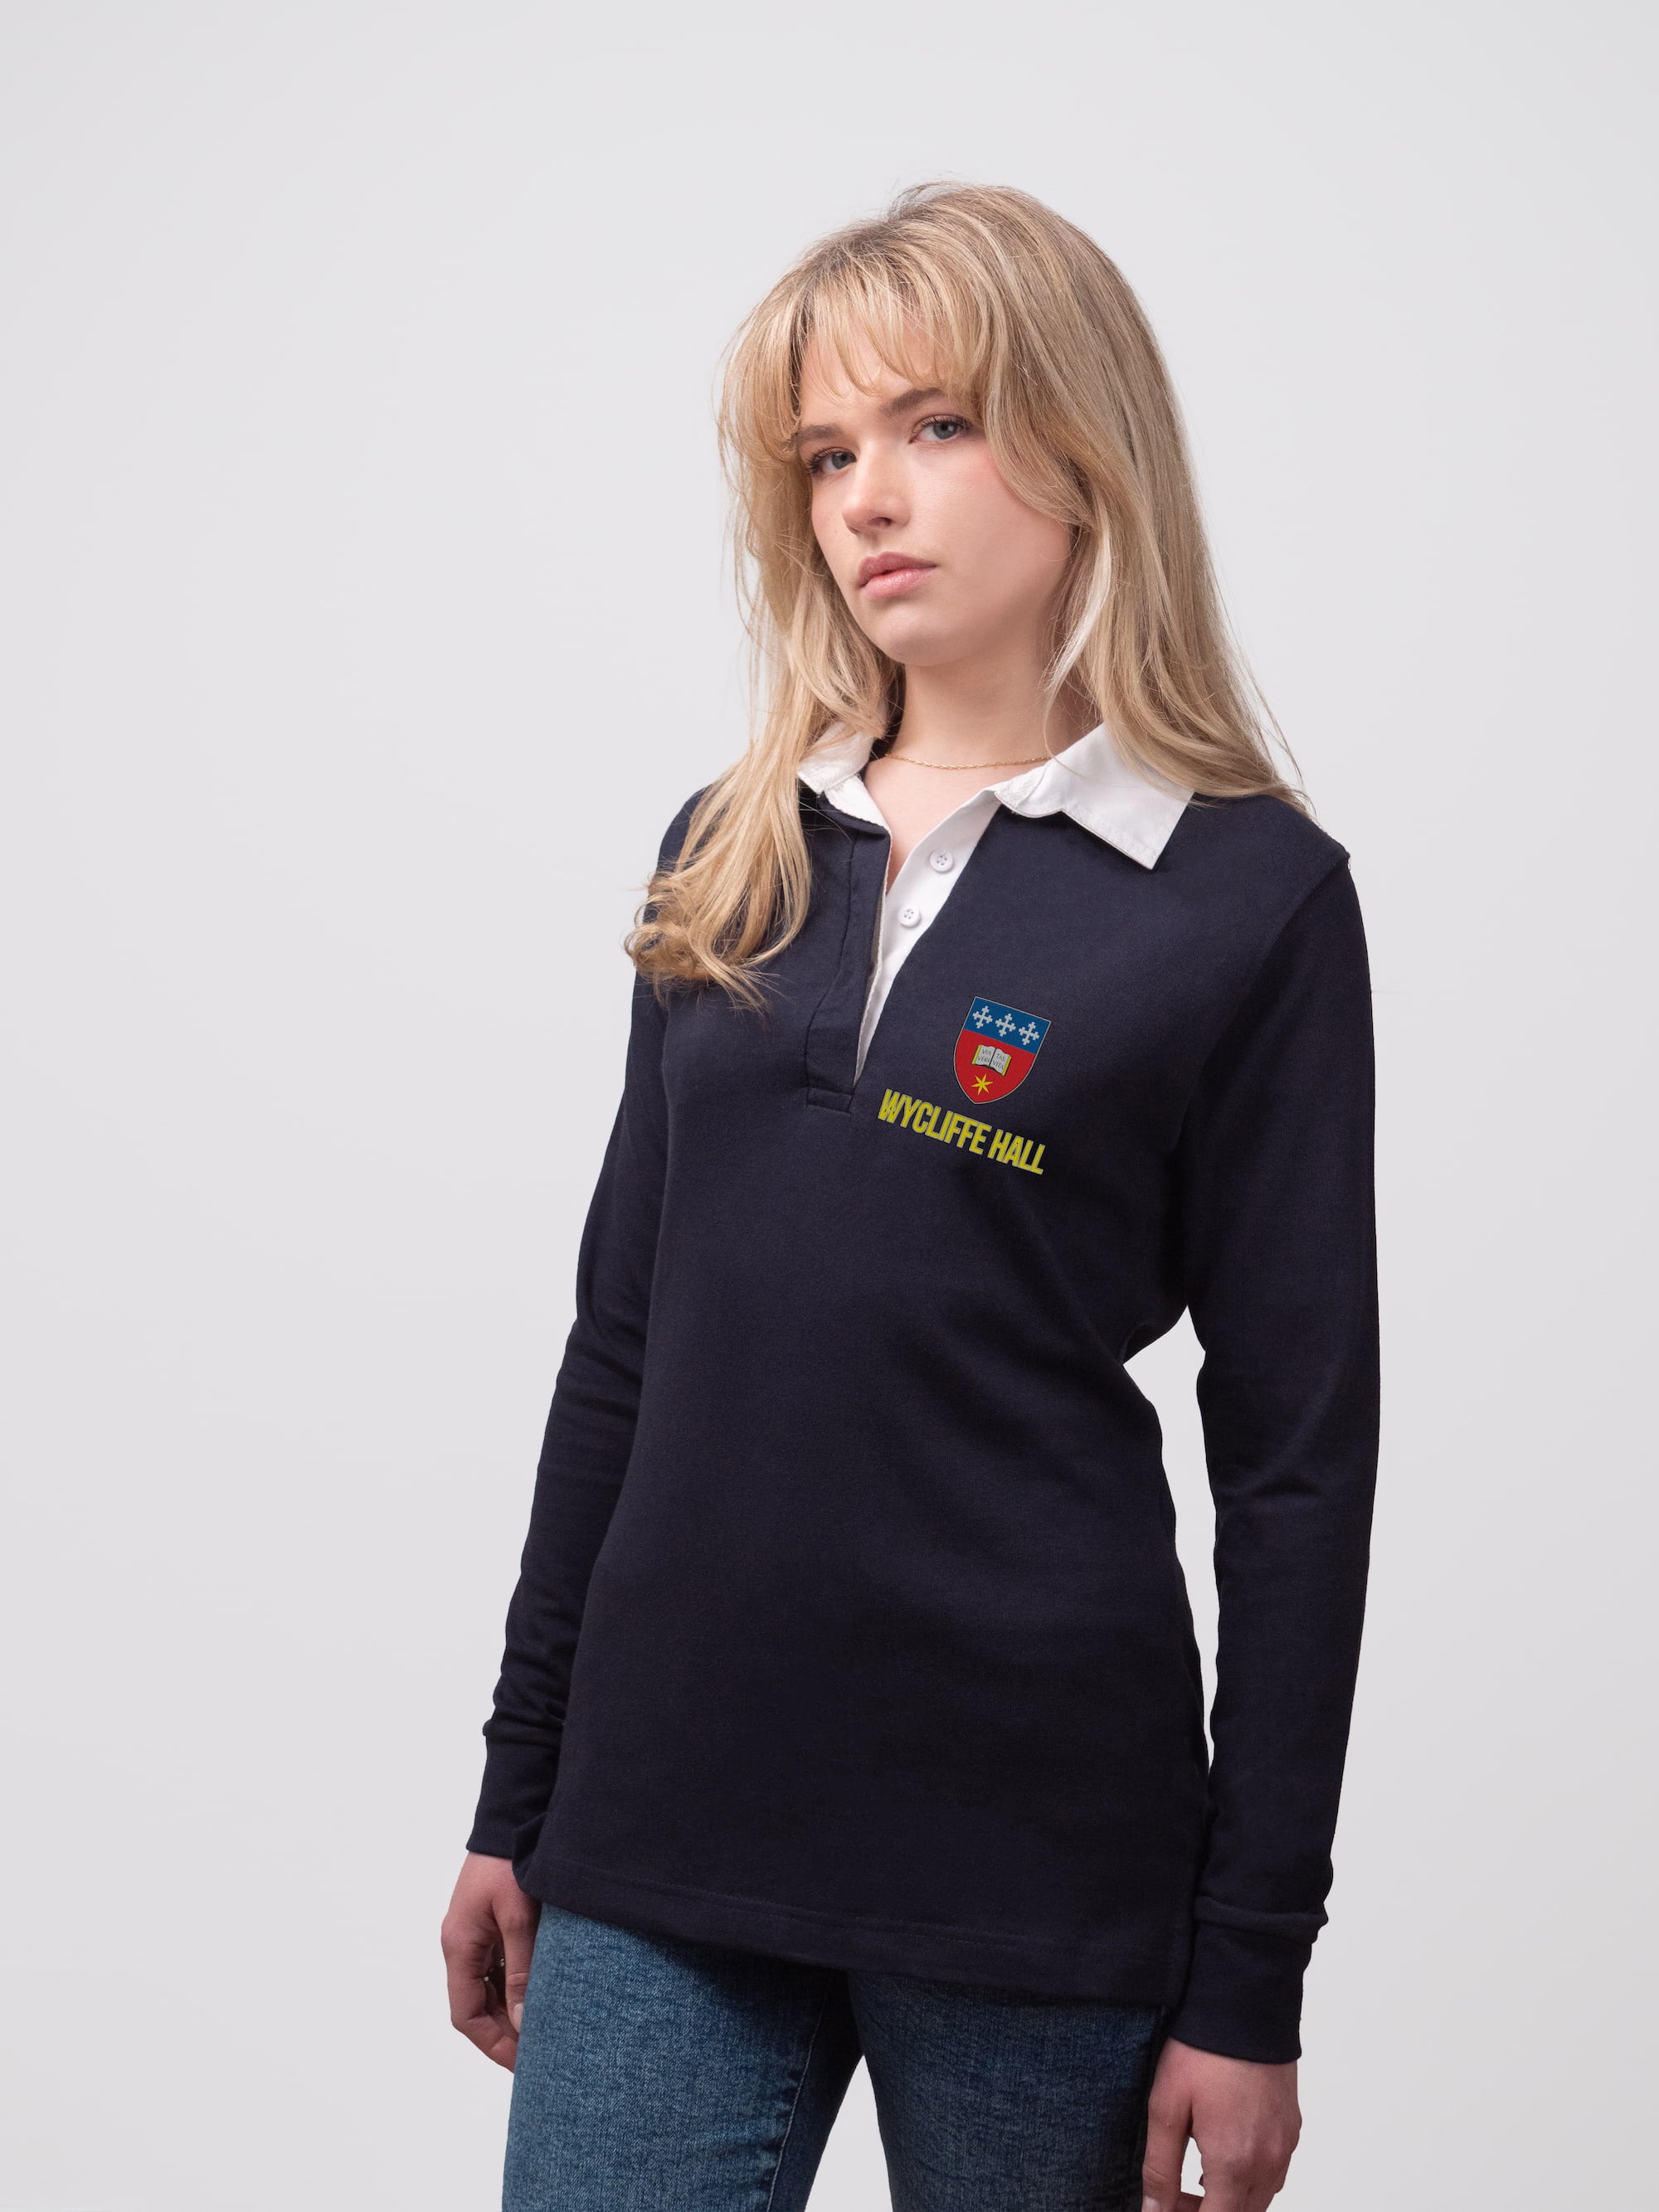 Student wearing a navy Wycliffe Hall College rugby shirt with embroidered crest